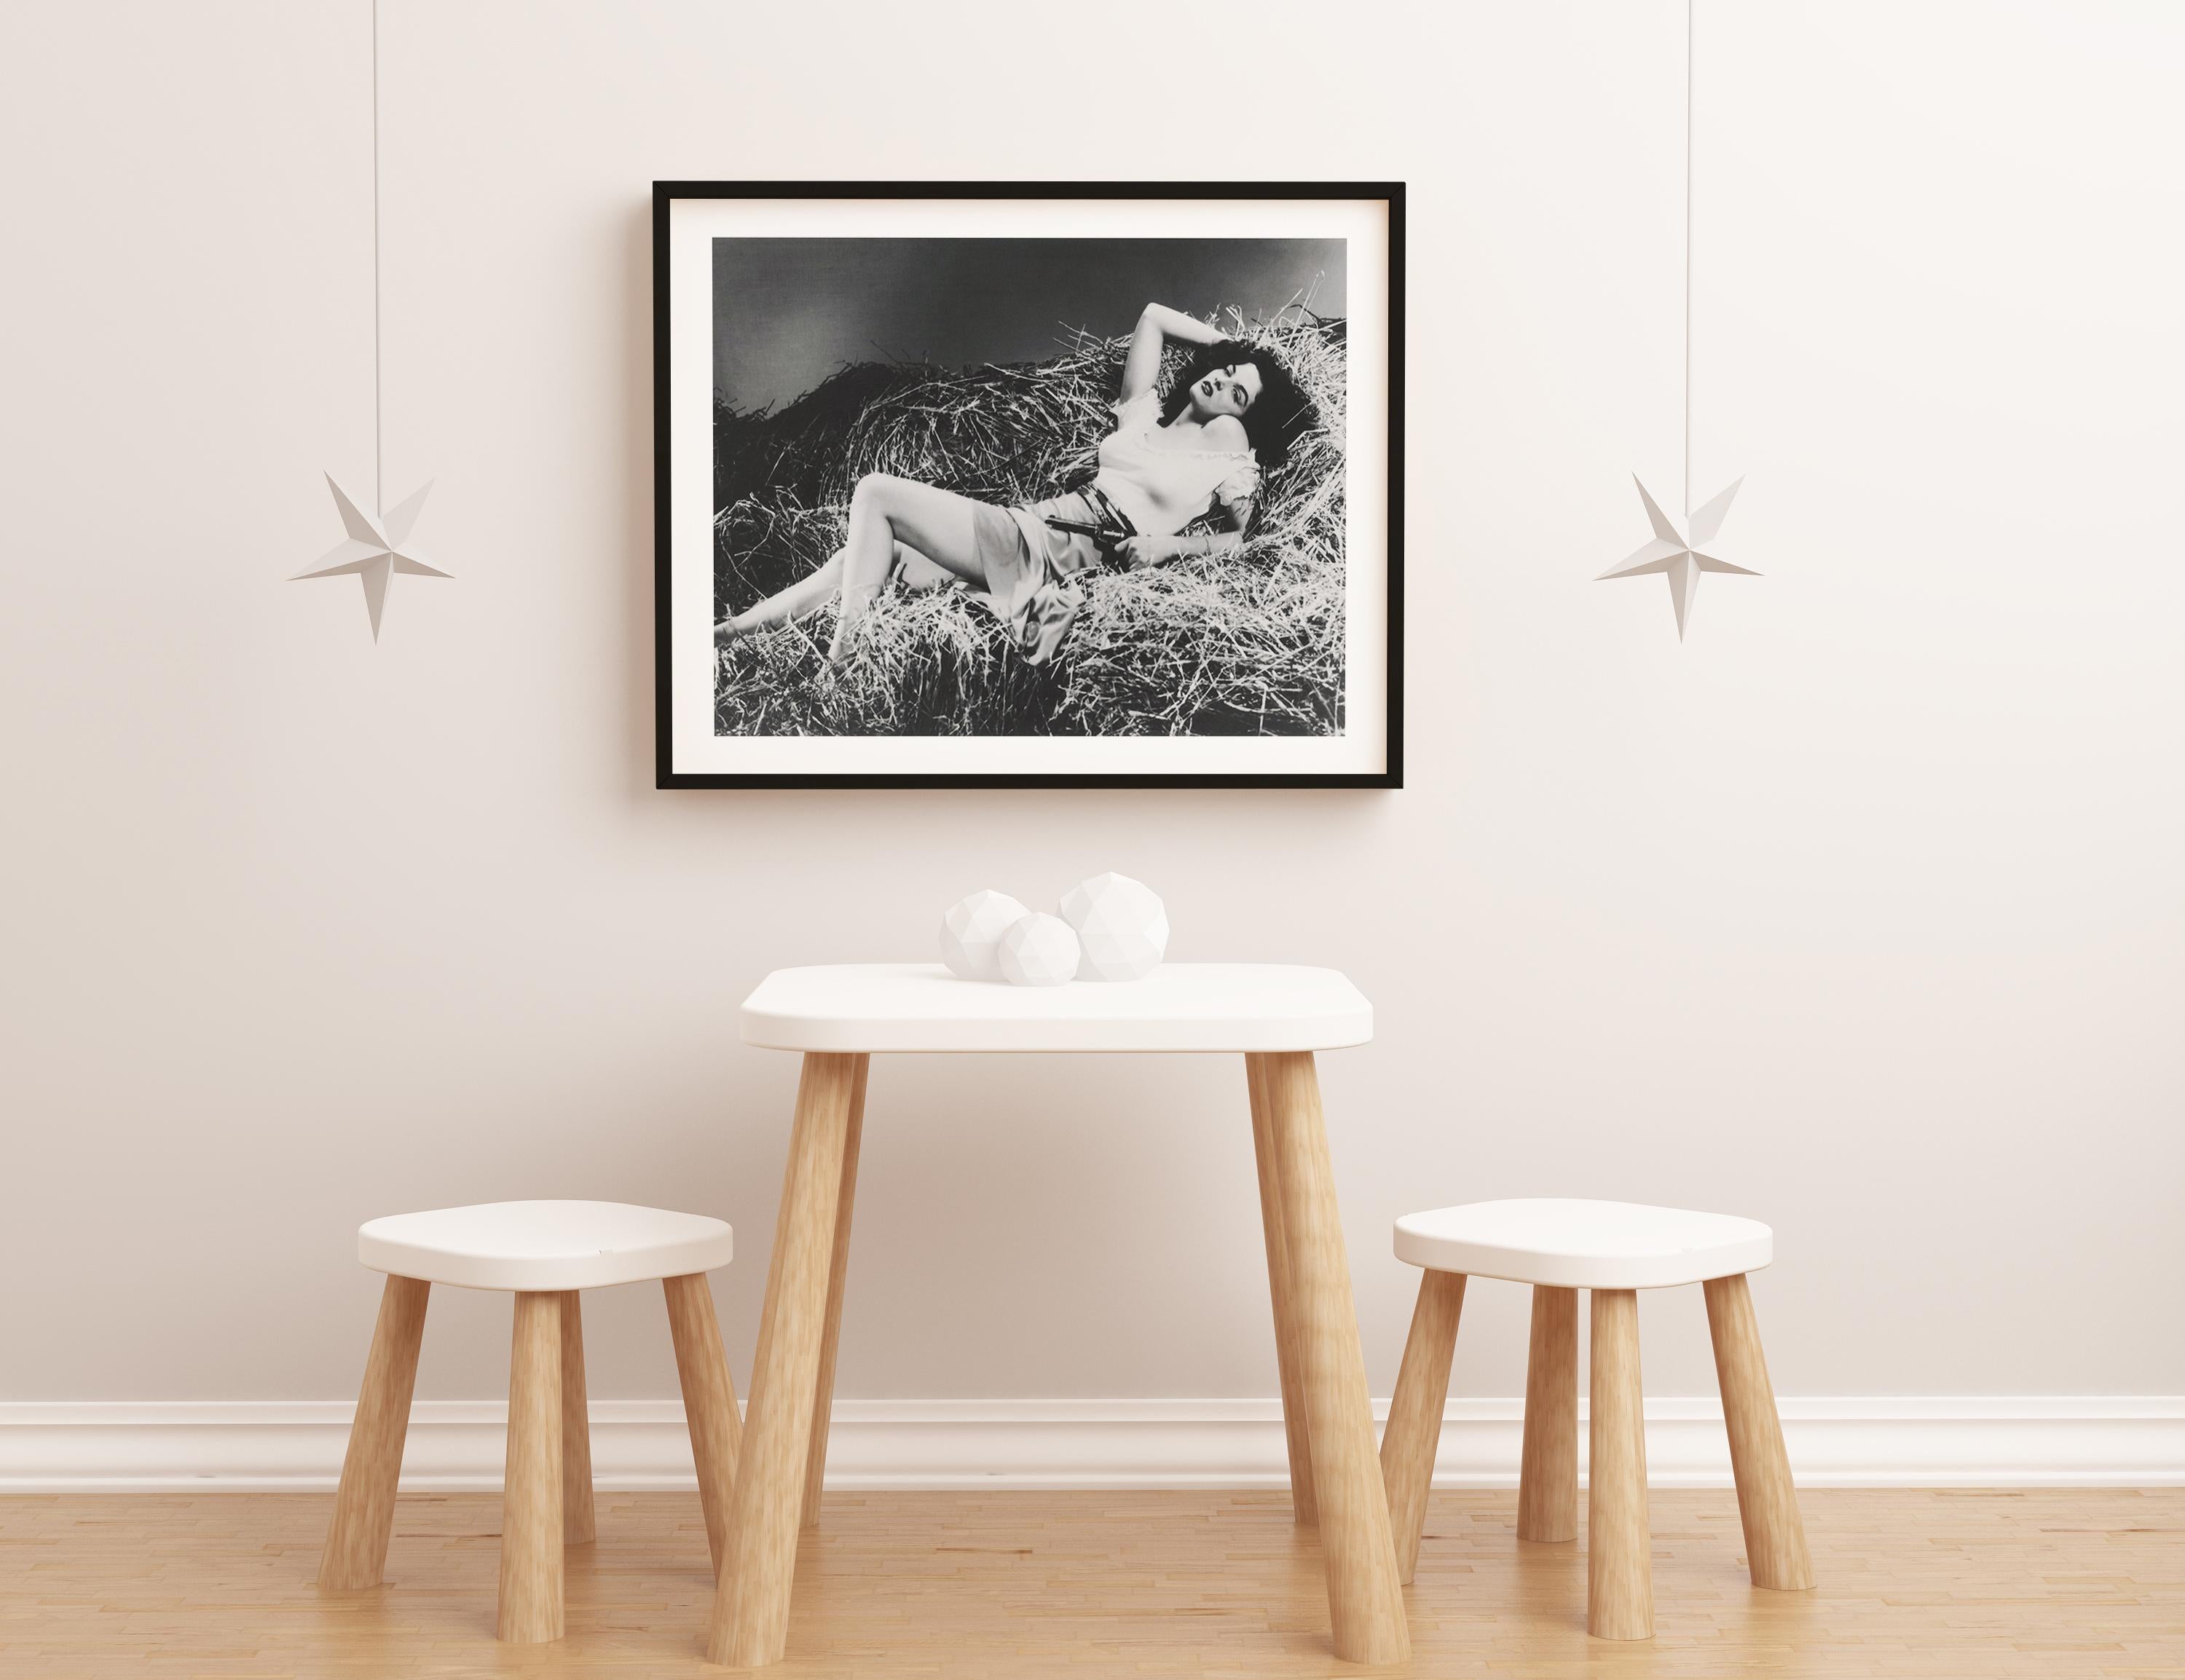 Jane Russell: The Outlaw Globe Photos Fine Art Print - Black Portrait Photograph by George Hurrell